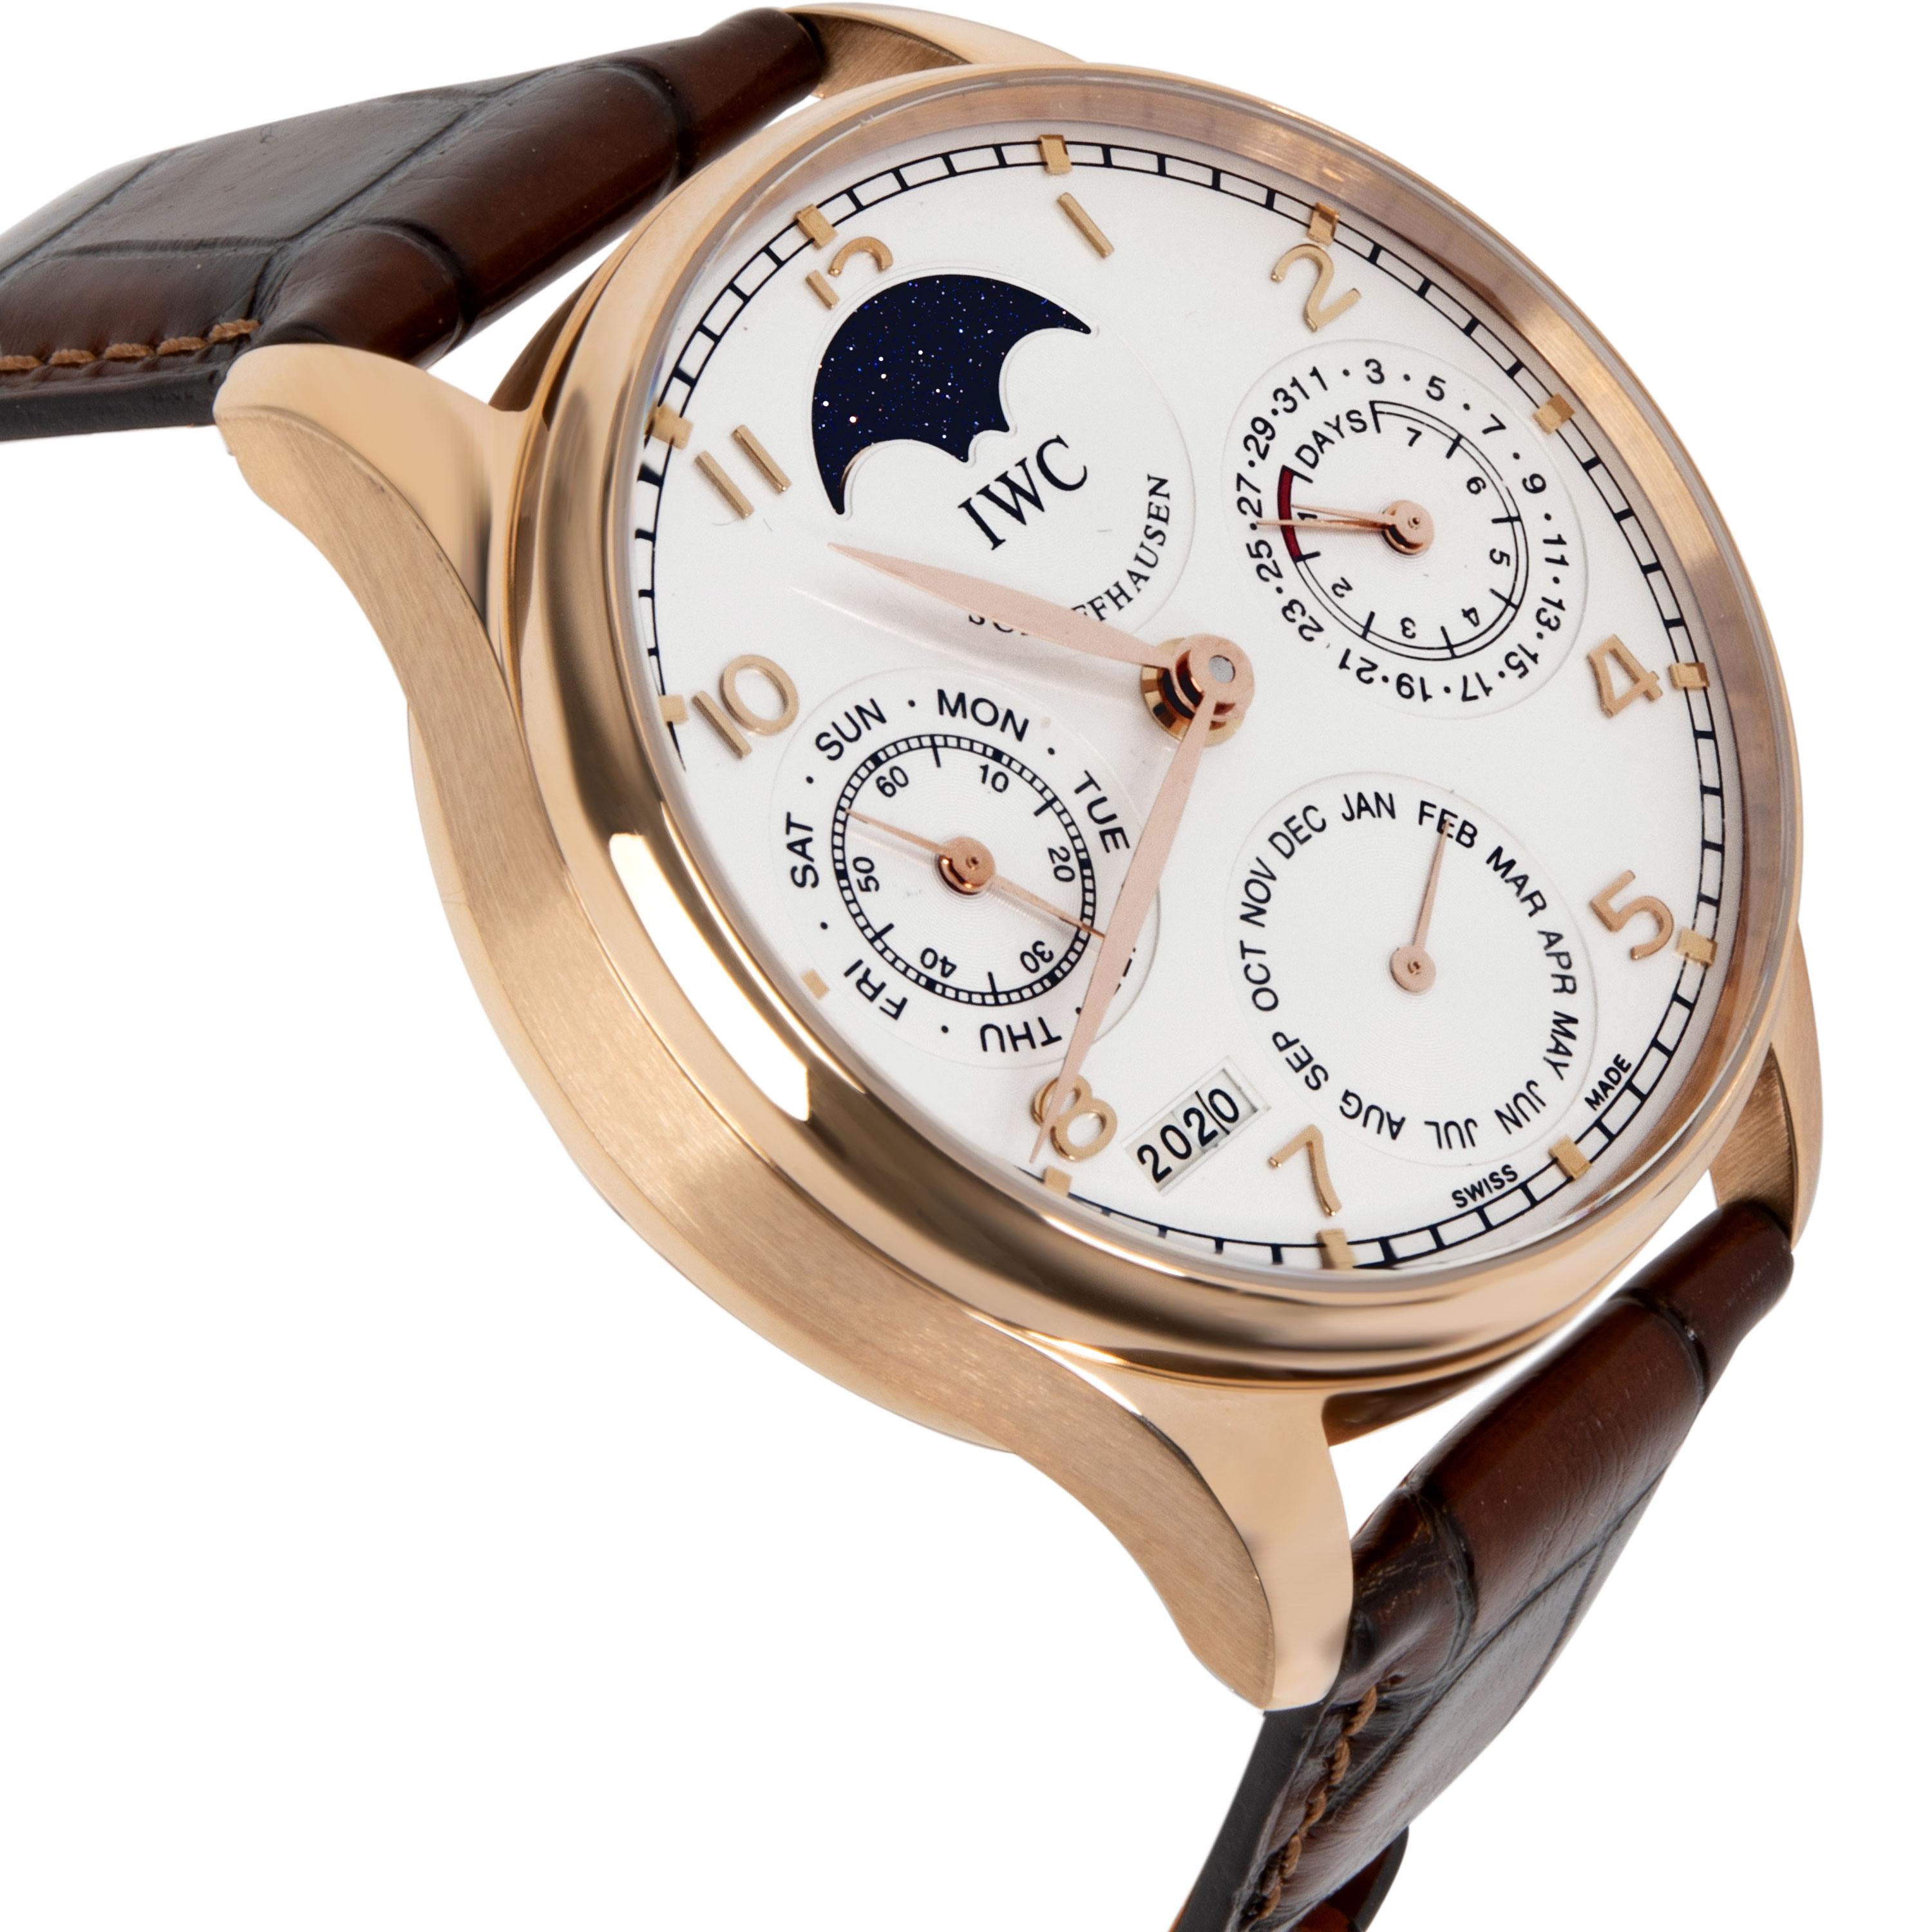 IWC Portuguese Perpetual Calendar Moonphase IW502306 Men's Watch in 18kt Rose Gold

SKU: 104729

PRIMARY DETAILS
Brand:  IWC
Model: Portuguese Perpetual Calendar Moonphase
Serial Number: ***
Country of Origin: Switzerland
Movement Type: Mechanical: